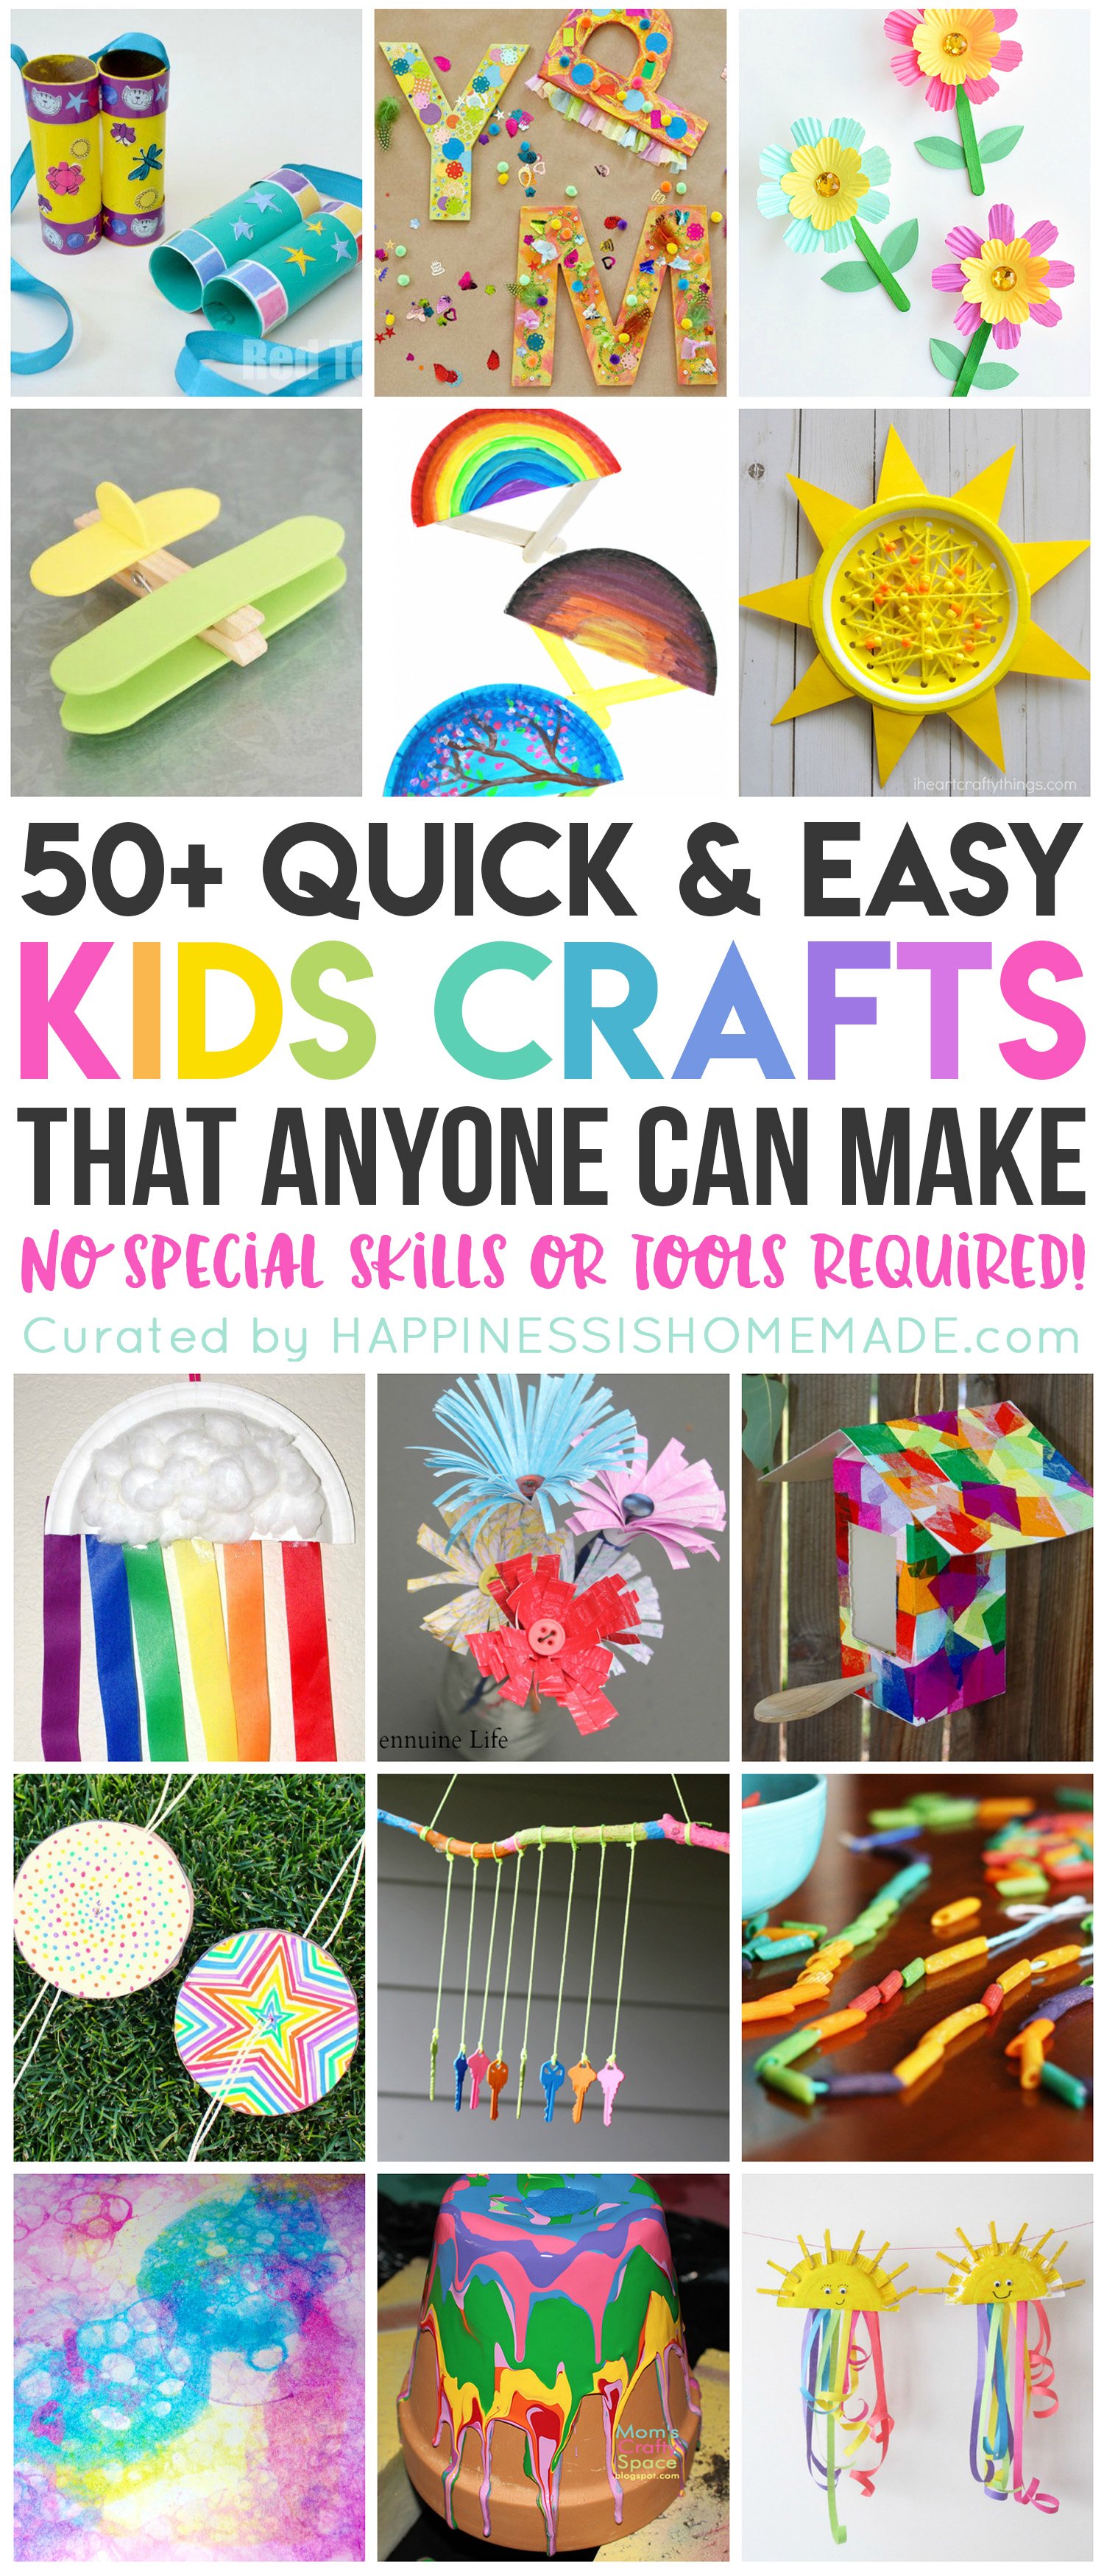 50+ quick and easy kids crafts anyone can make no special skills or tools required 